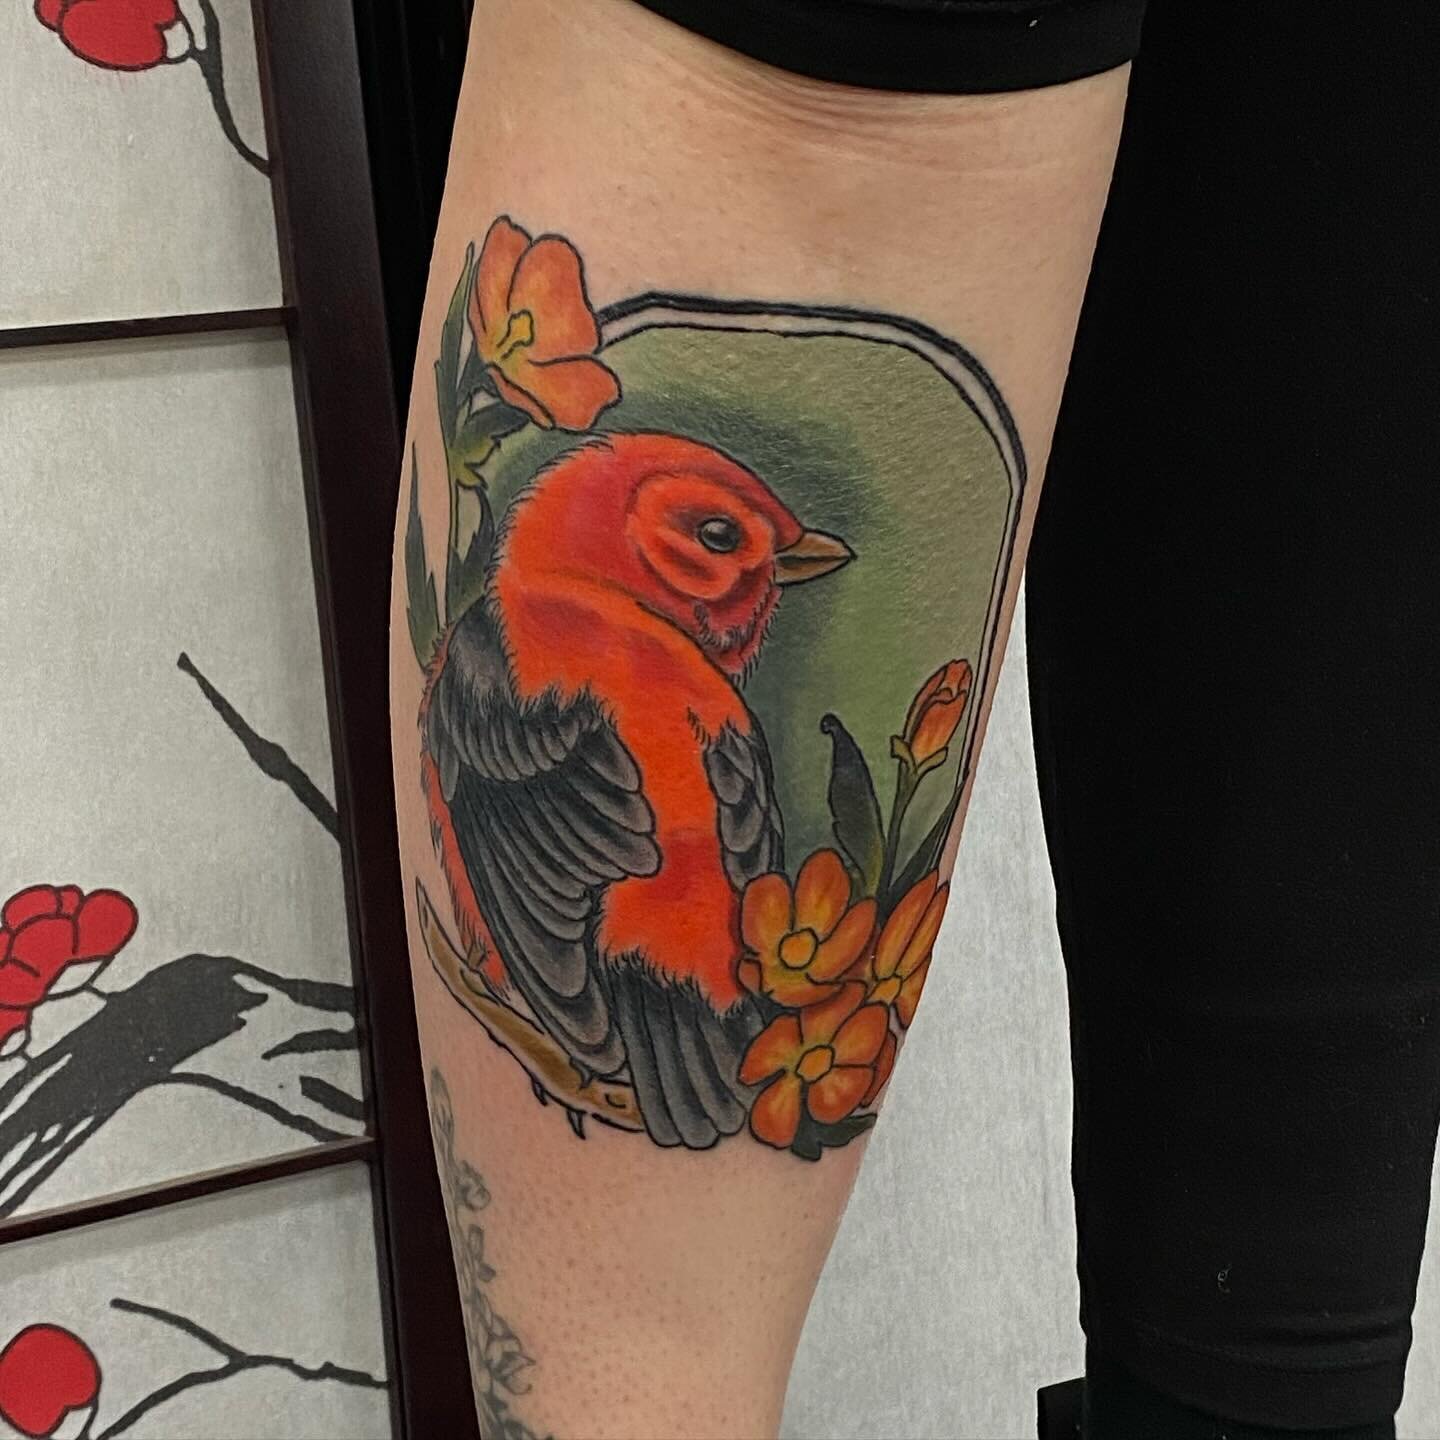 Scarlet tanager with desert globe mallows by @coltrontattoos dm coltron to set up appointments